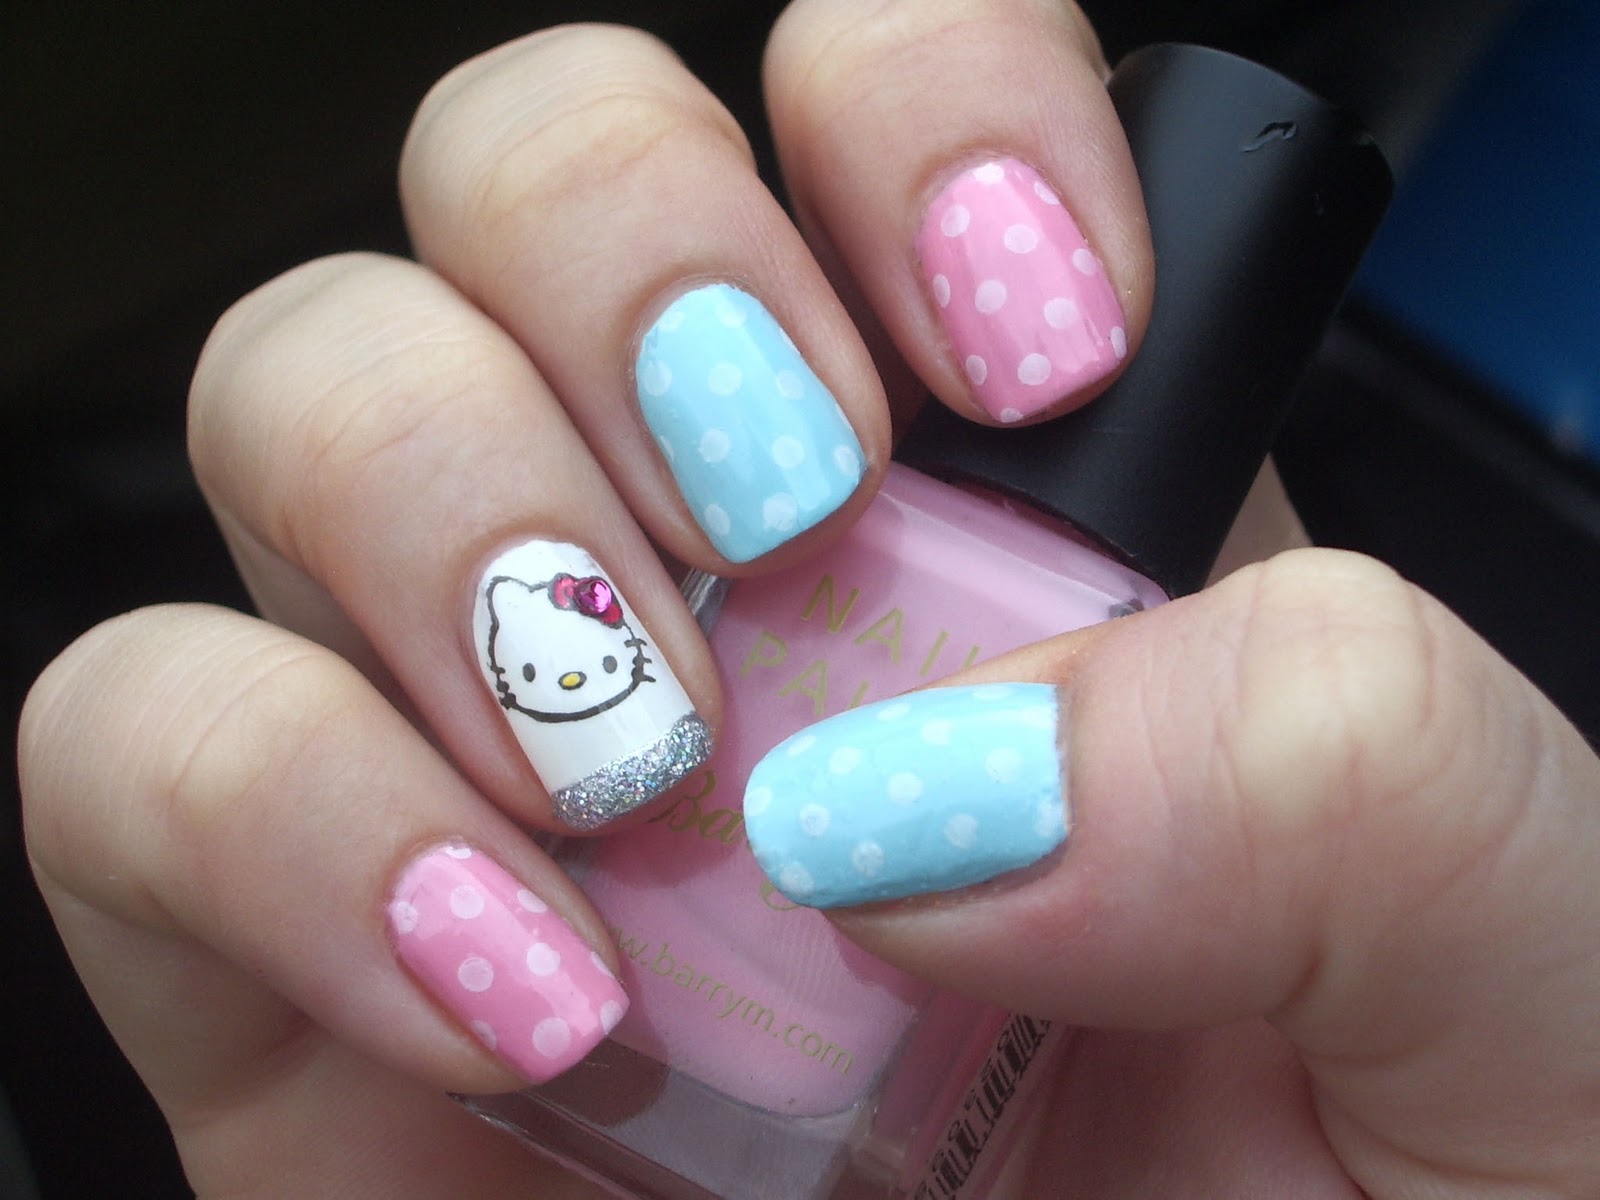 5. Hello Kitty Nail Designs for Short Nails - wide 3